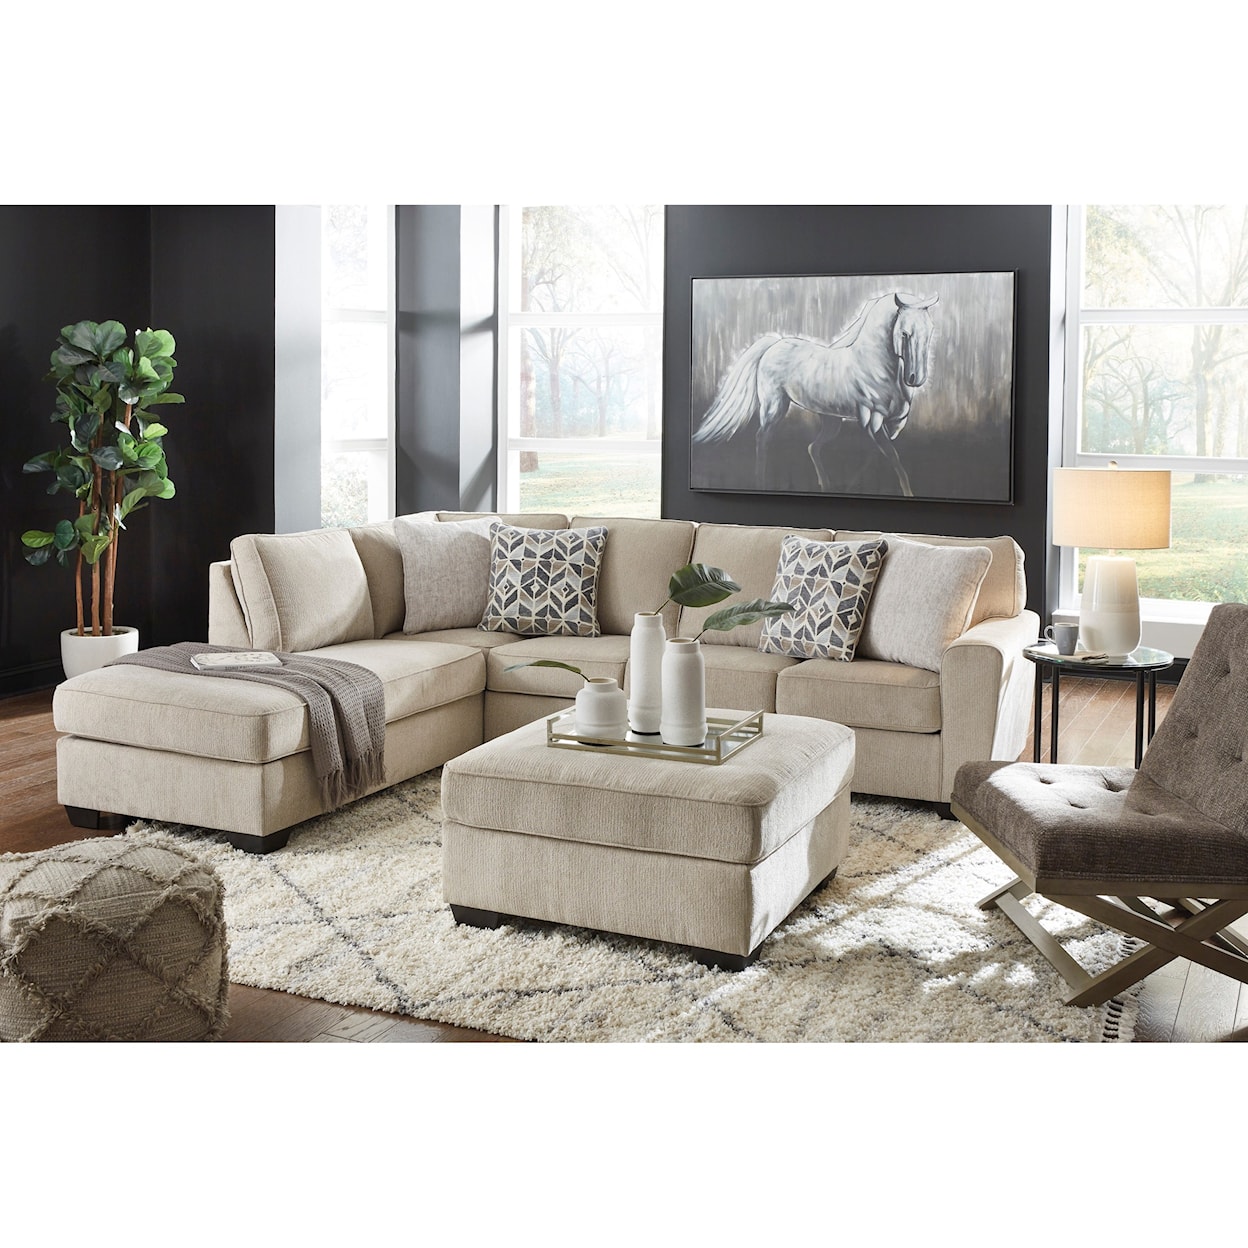 Signature Daydream Living Room Group